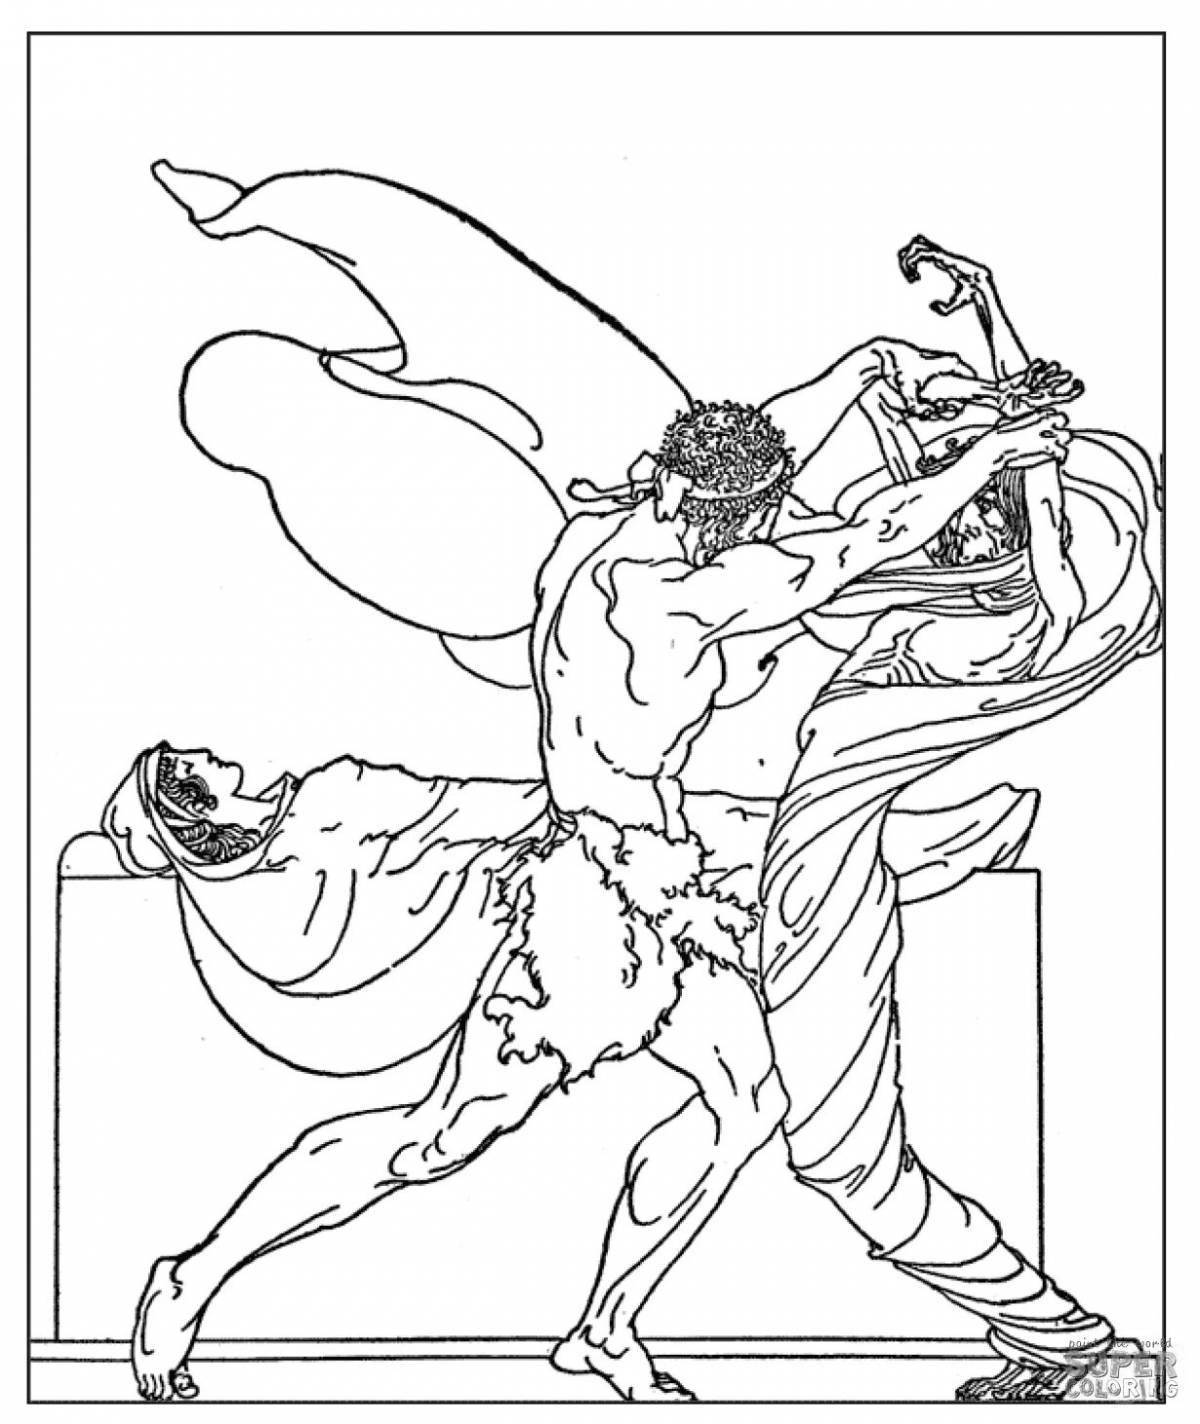 Coloring page impressive labors of Hercules